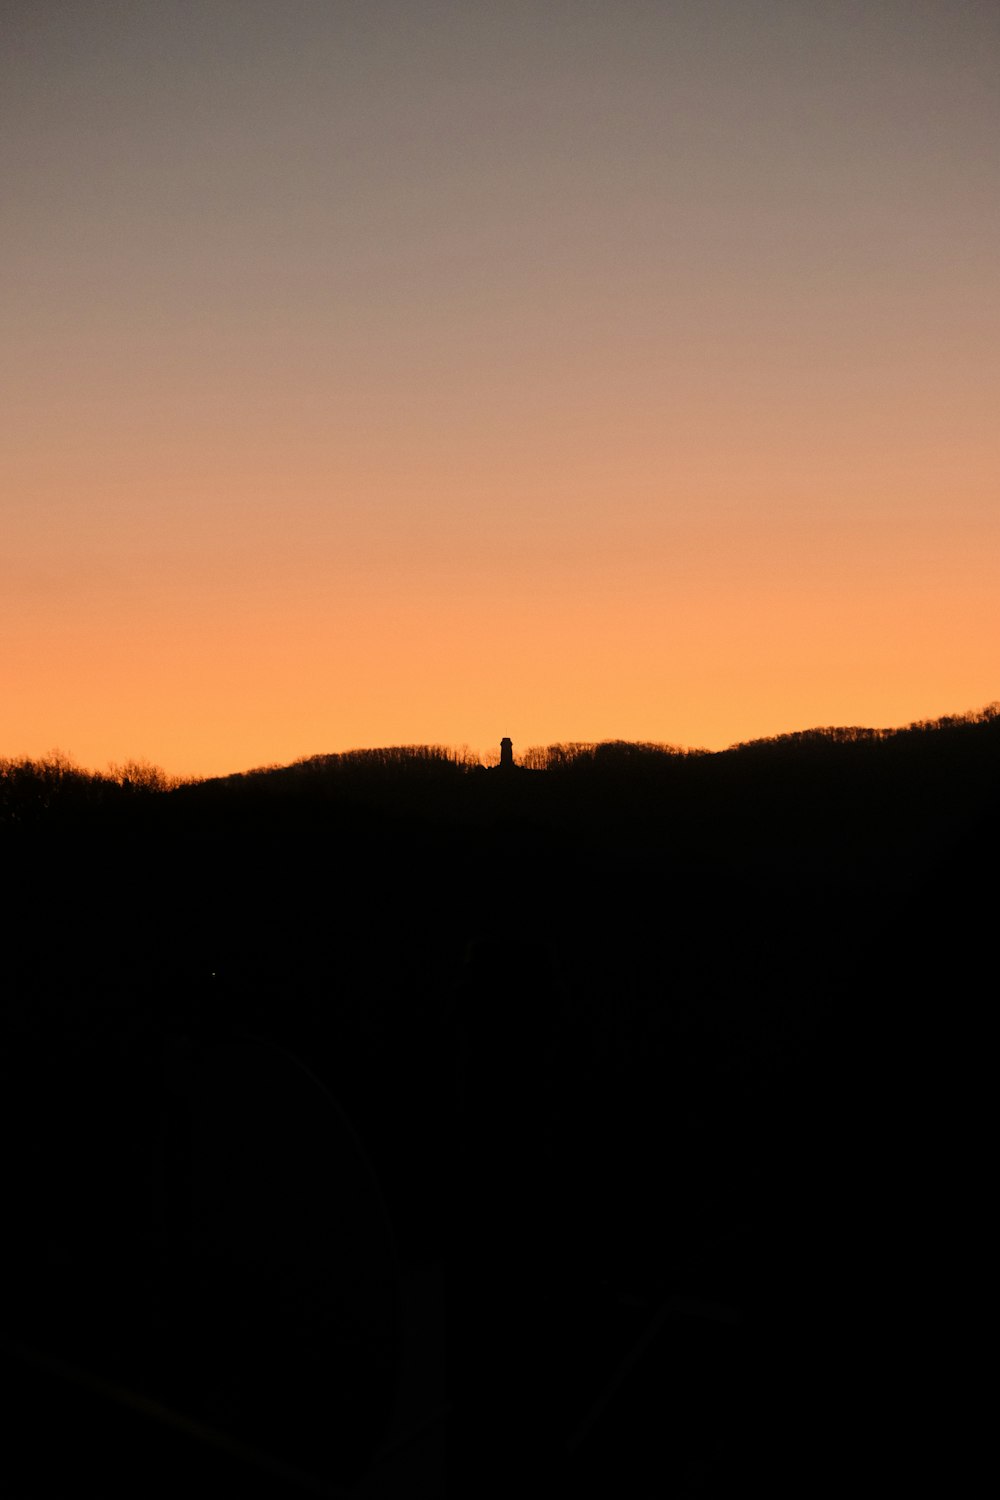 a silhouette of a person standing on a hill at sunset